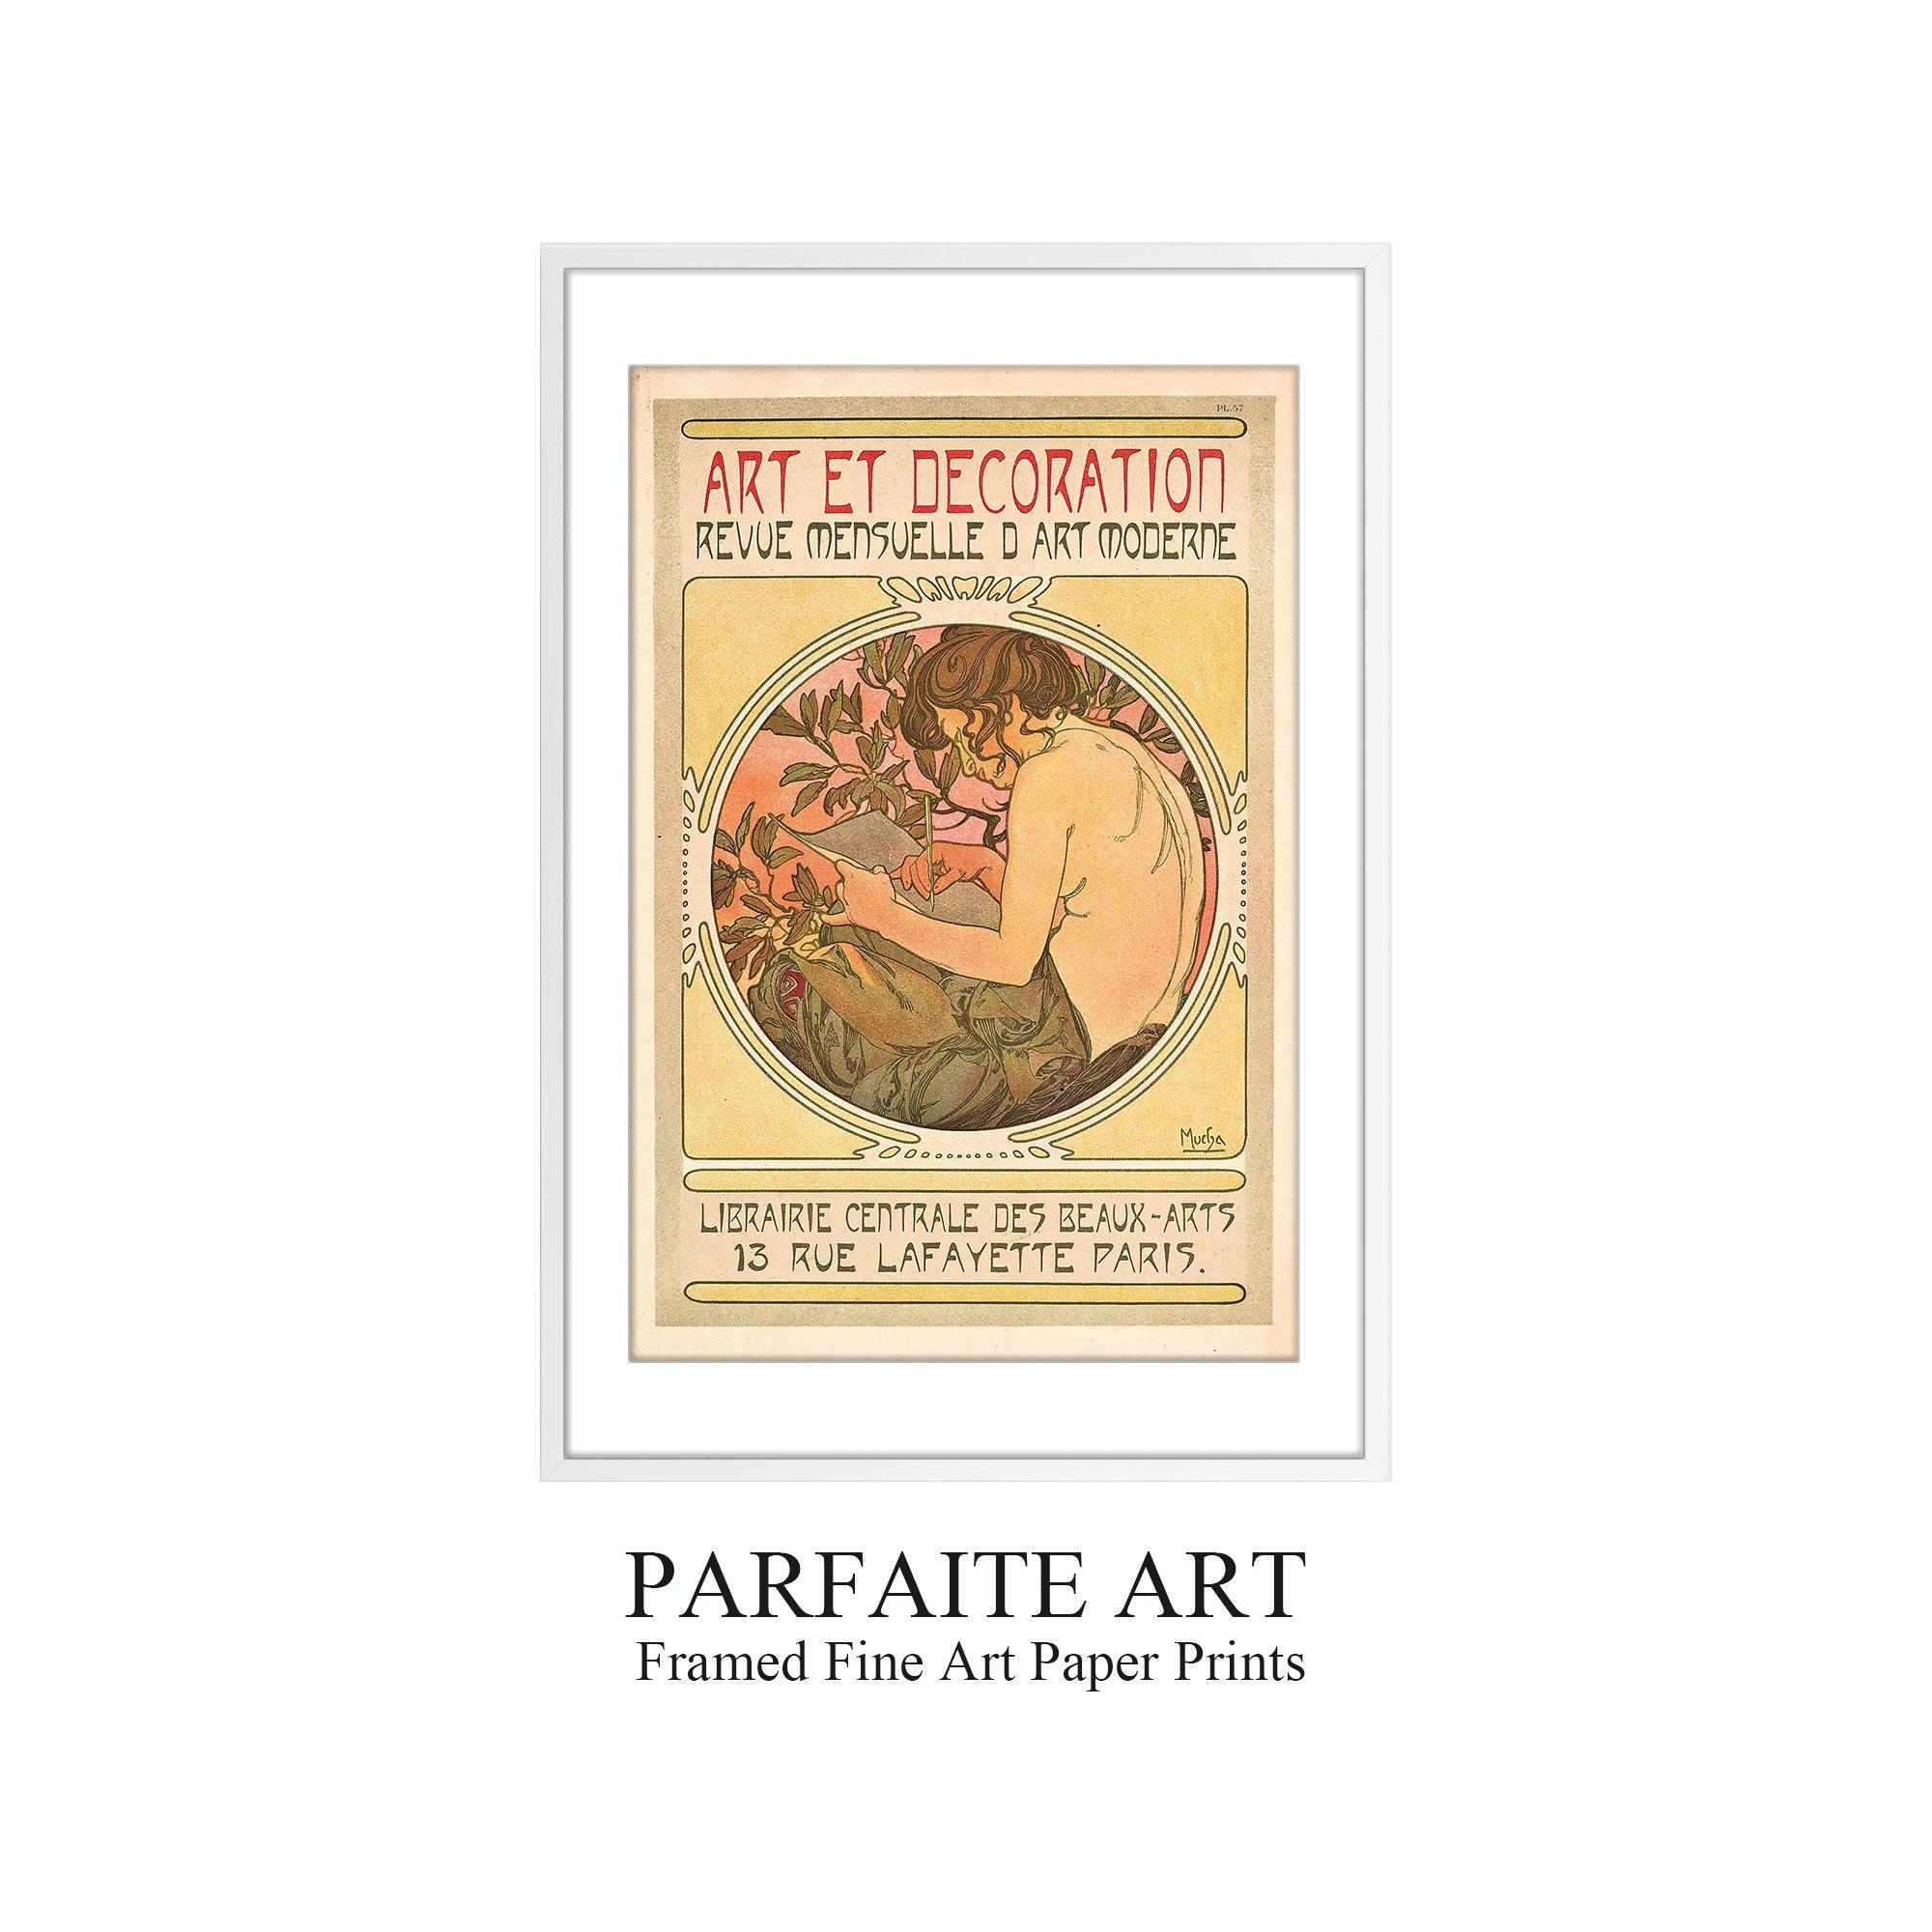 Framed fine art prints,Vintage Wall Art Print,Moody Wall Decor,Large art prints for walls,Mucha artwork,High-Quality Professional Giclee technique white Frame